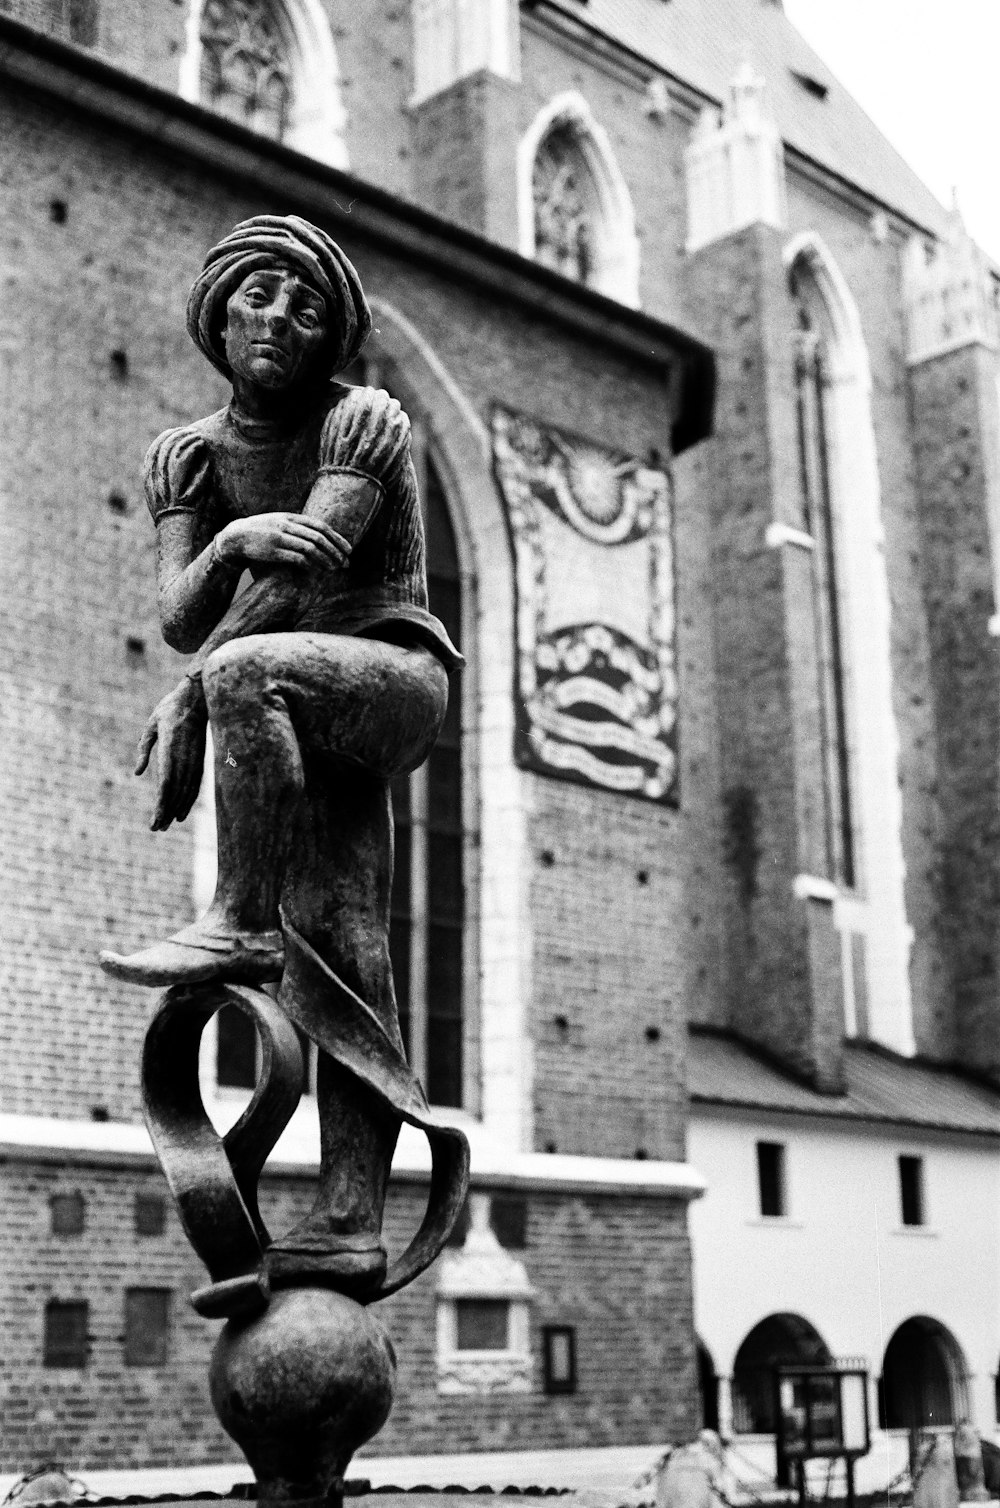 a black and white photo of a statue in front of a building